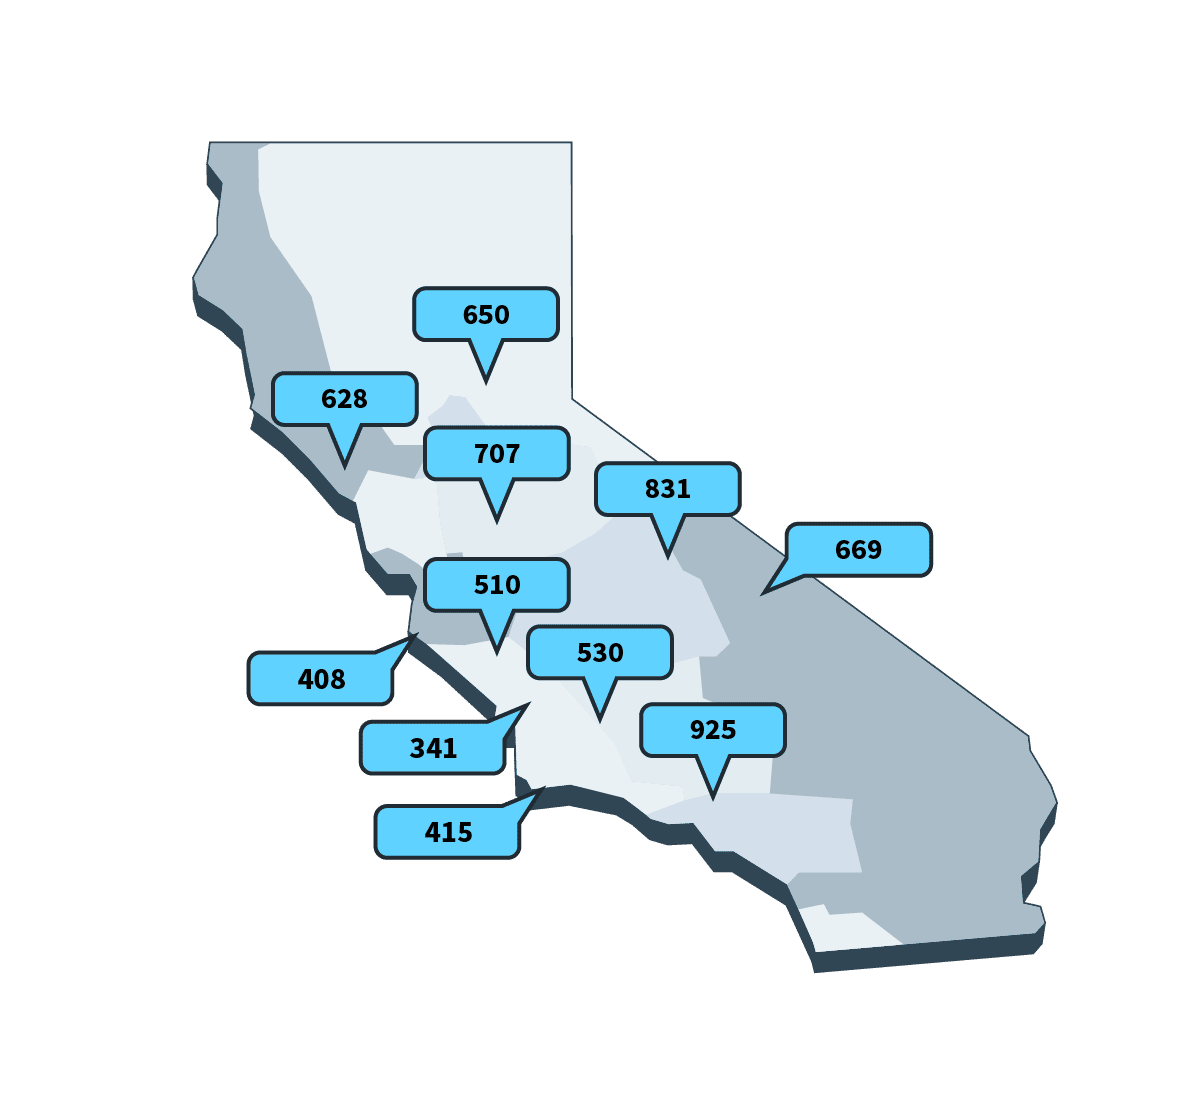 San Fransisco Area Code Phone Numbers